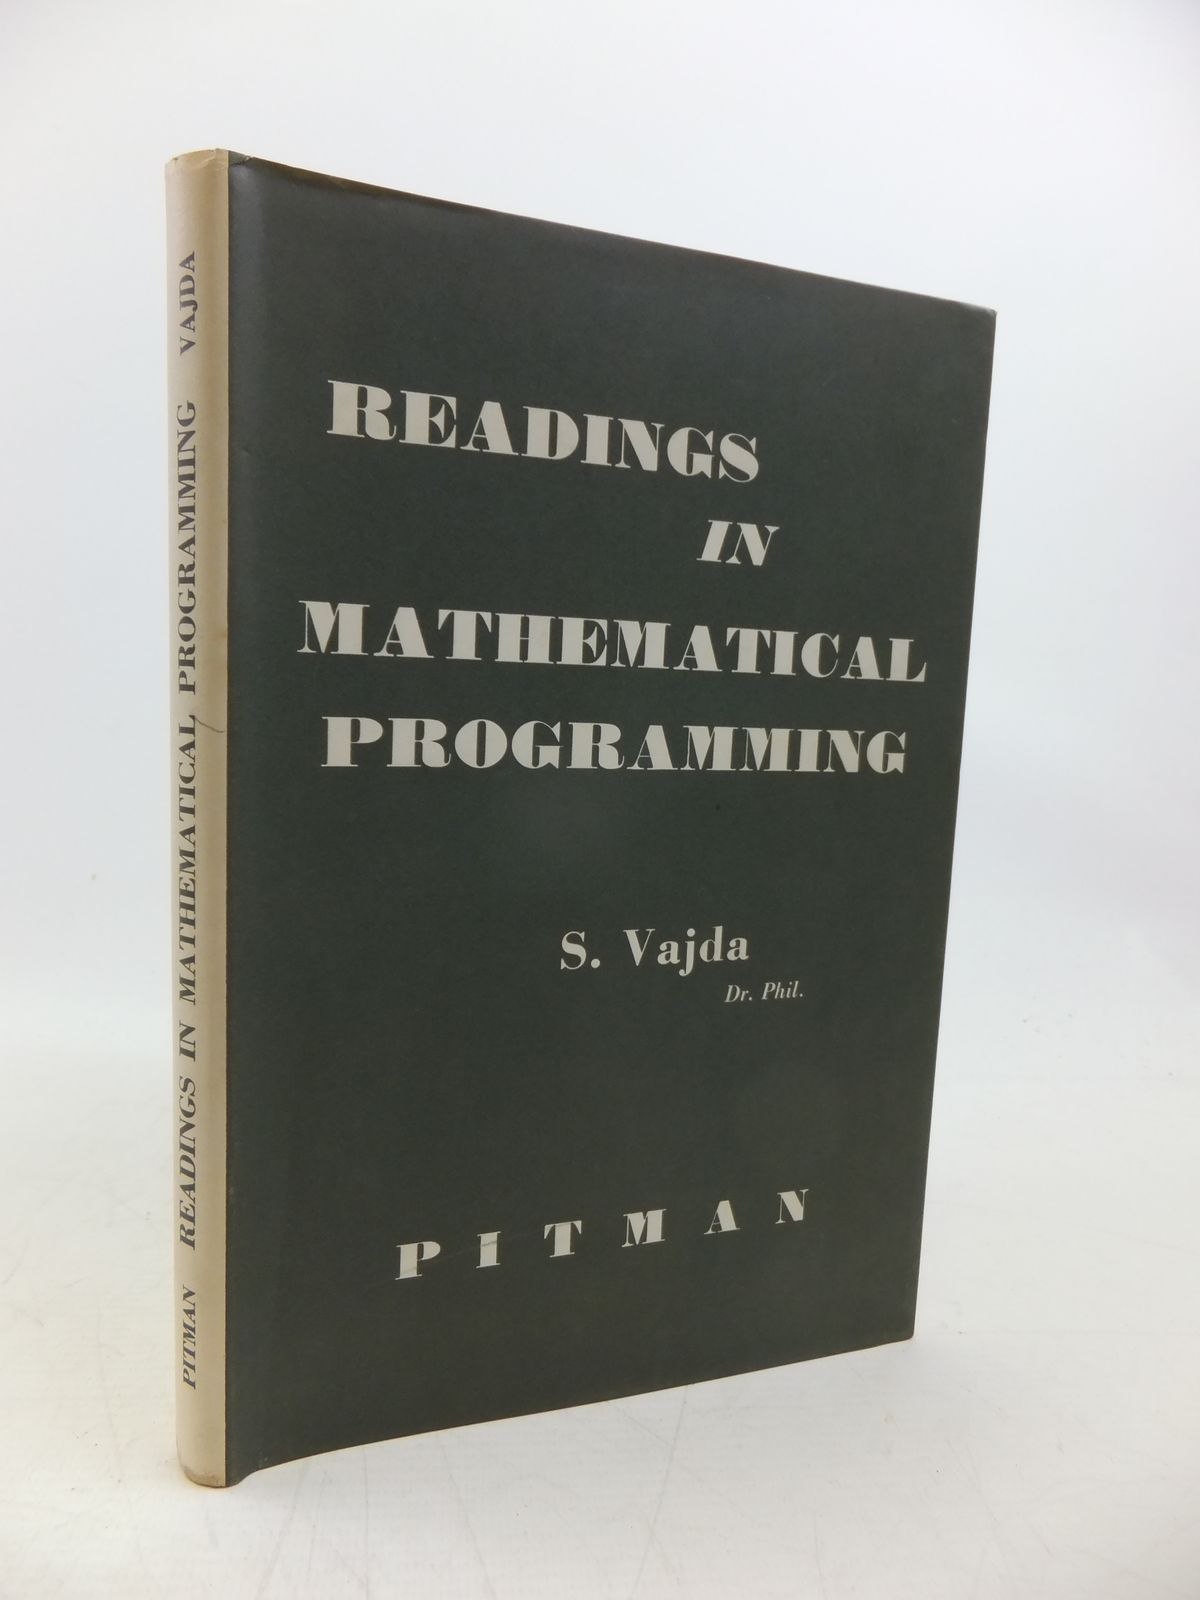 Photo of READINGS IN MATHEMATICAL PROGRAMMING written by Vajda, S. published by Sir Isaac Pitman & Sons Ltd. (STOCK CODE: 2120317)  for sale by Stella & Rose's Books